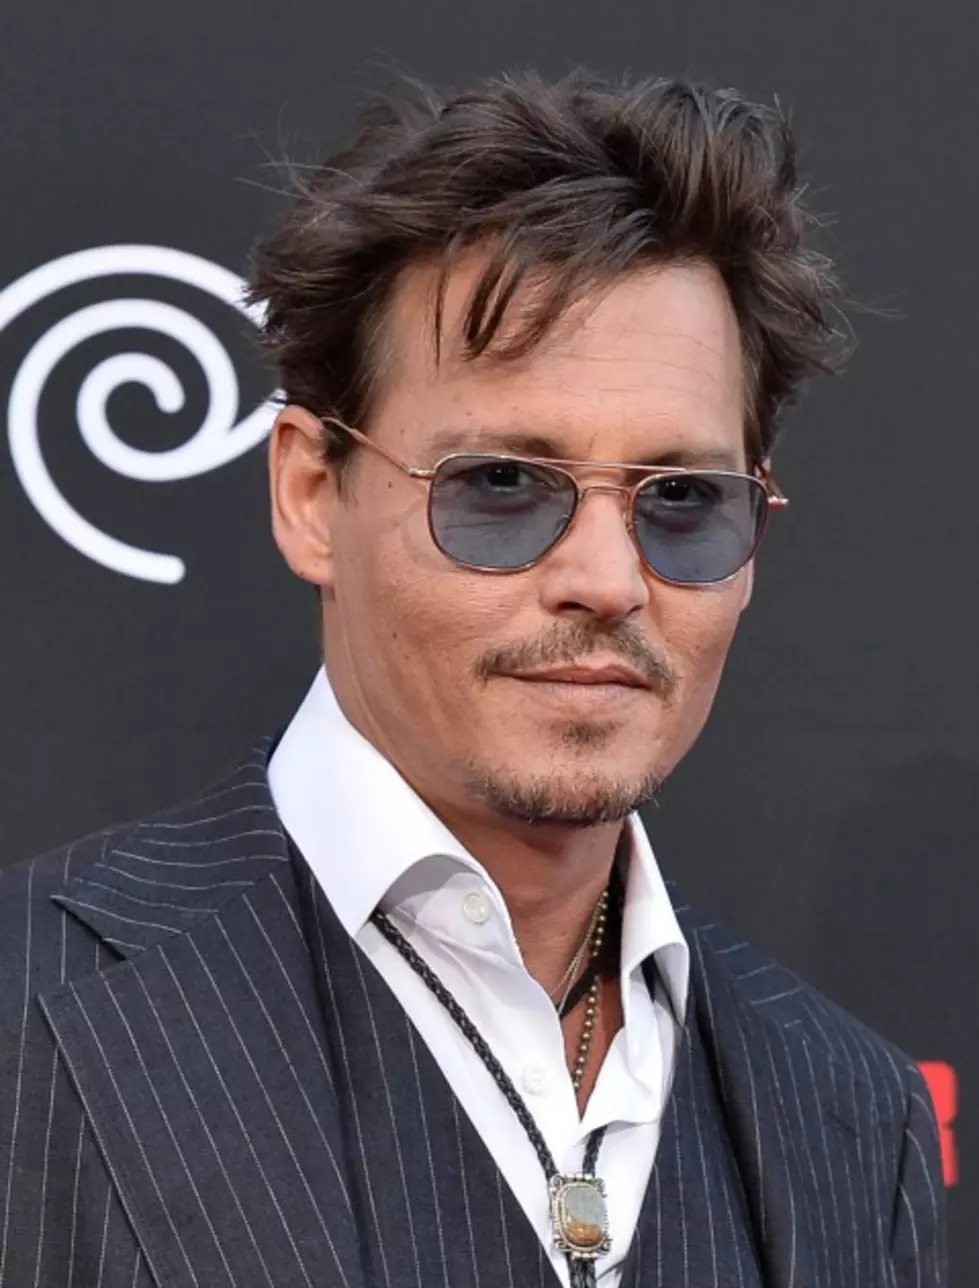 &#8216;The Lone Ranger&#8217; Star Johnny Depp Could Be Our Sidekick Anyday &#8212; Hump Day Hunk